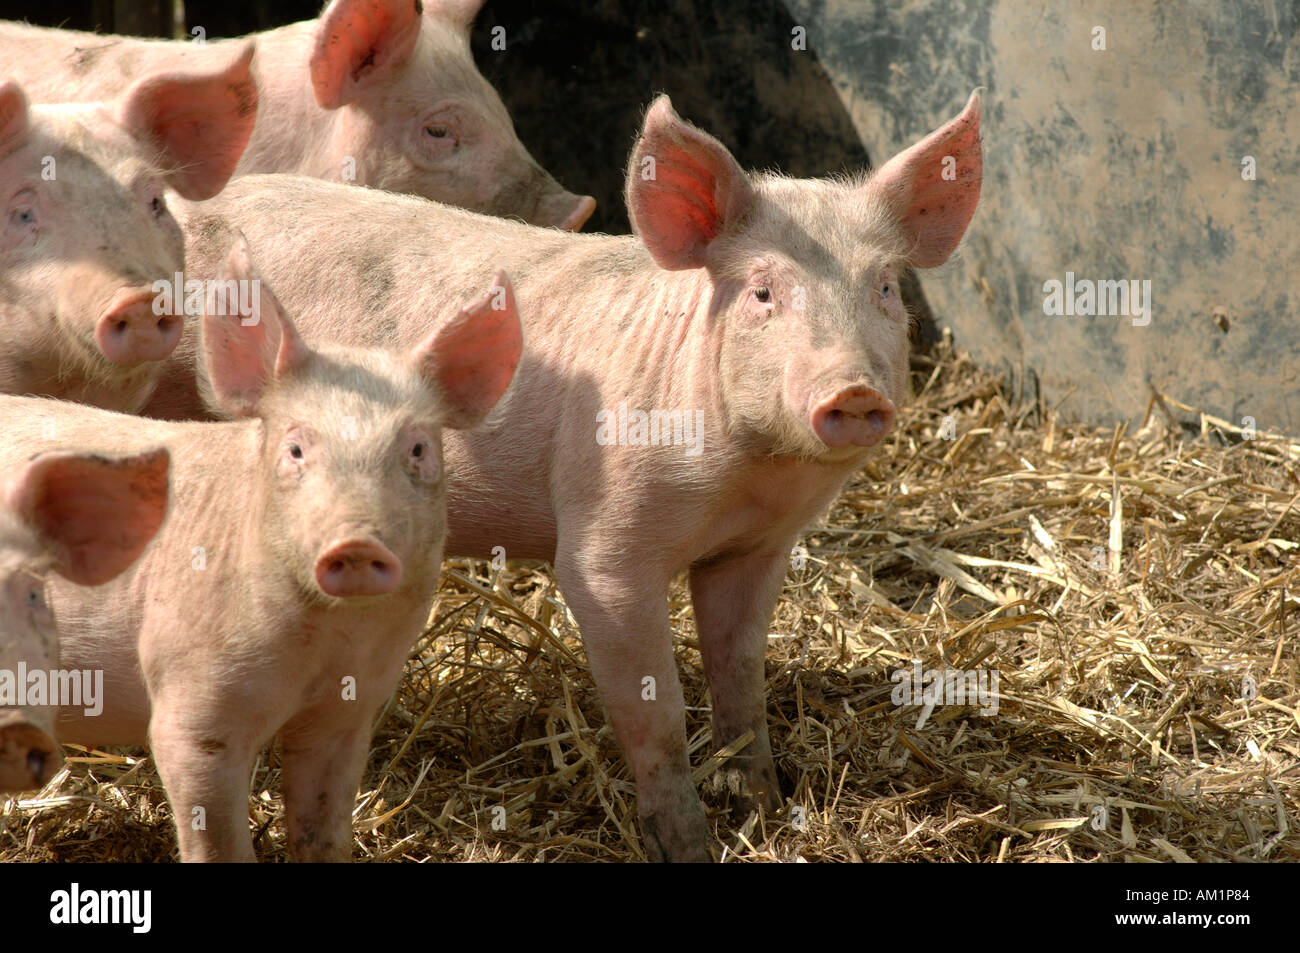 Large white cross weaners in a pen Stock Photo